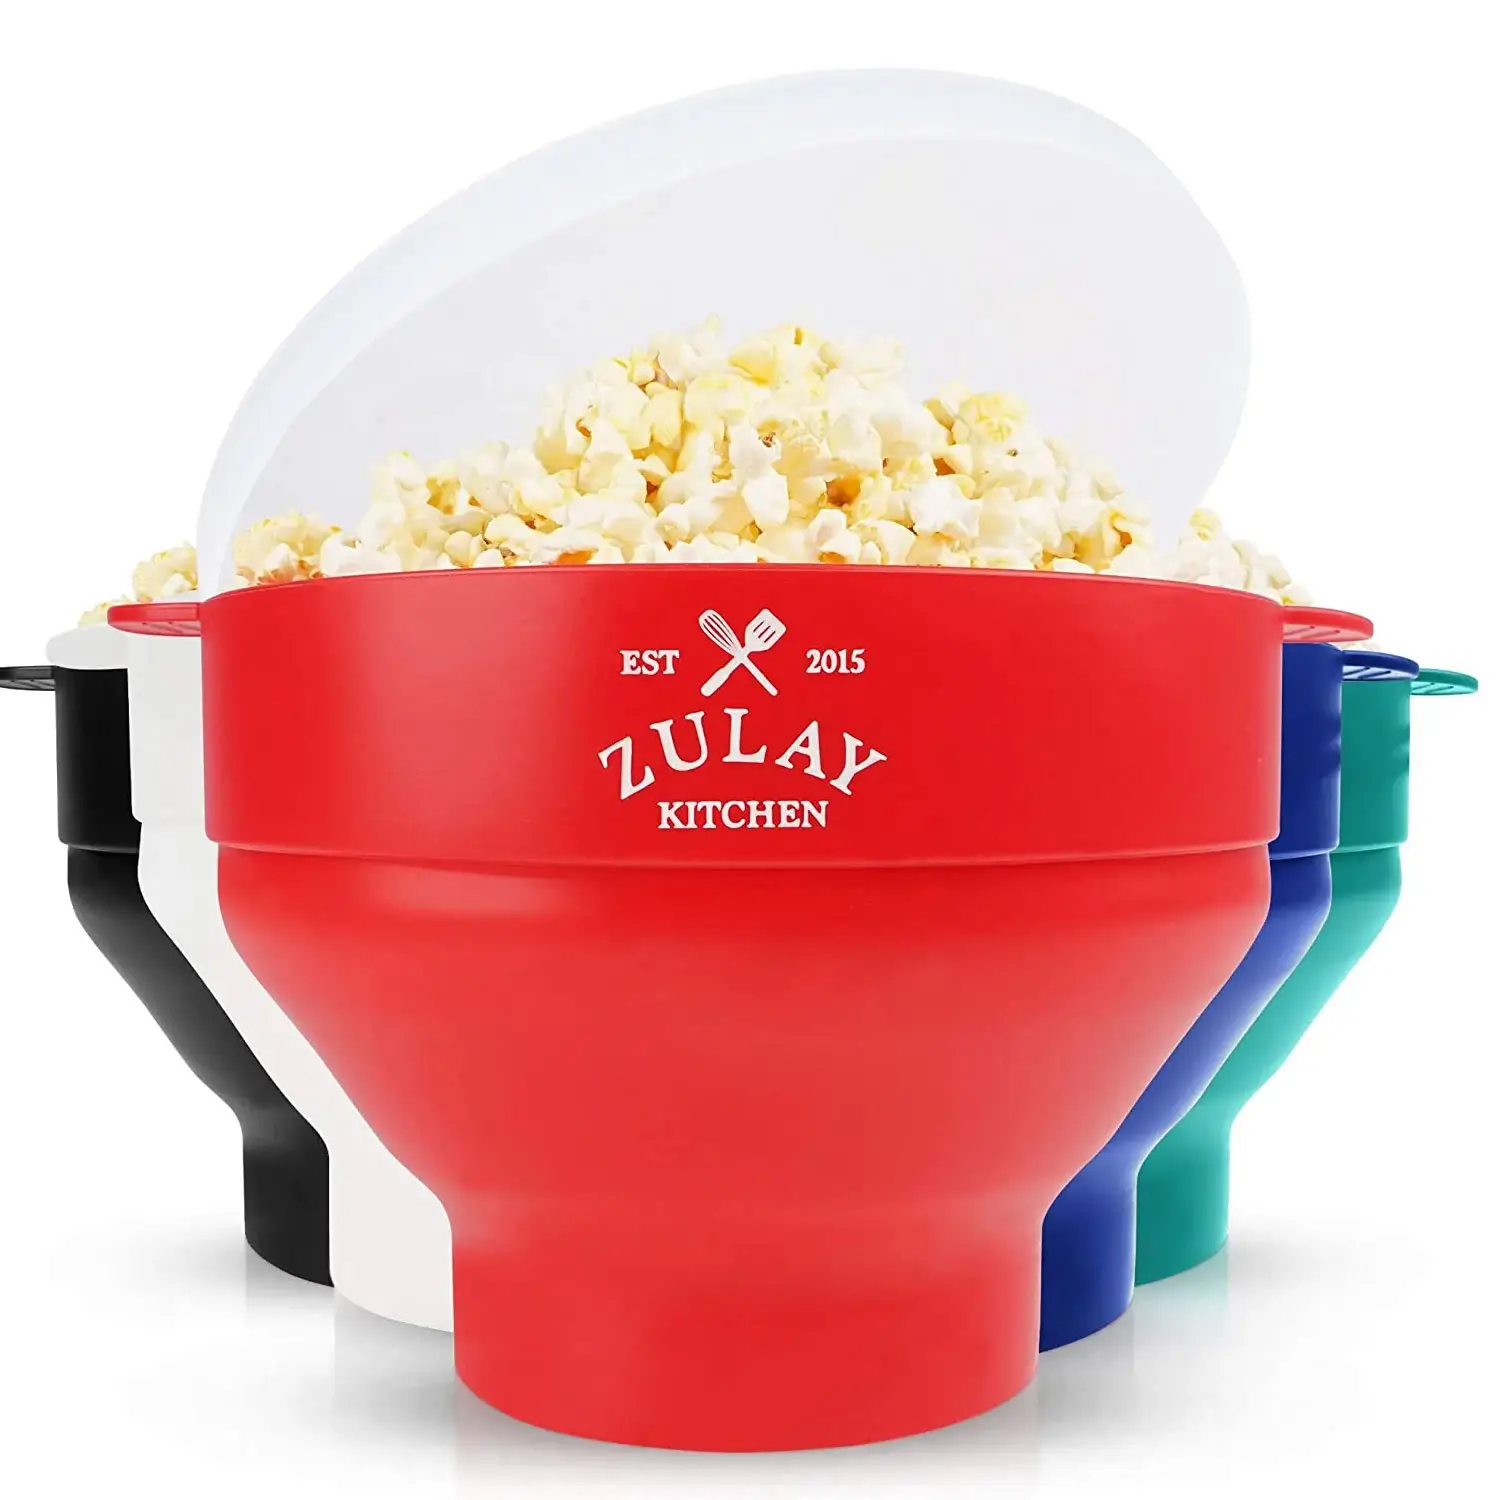 Collapsible Silicone Popcorn Maker